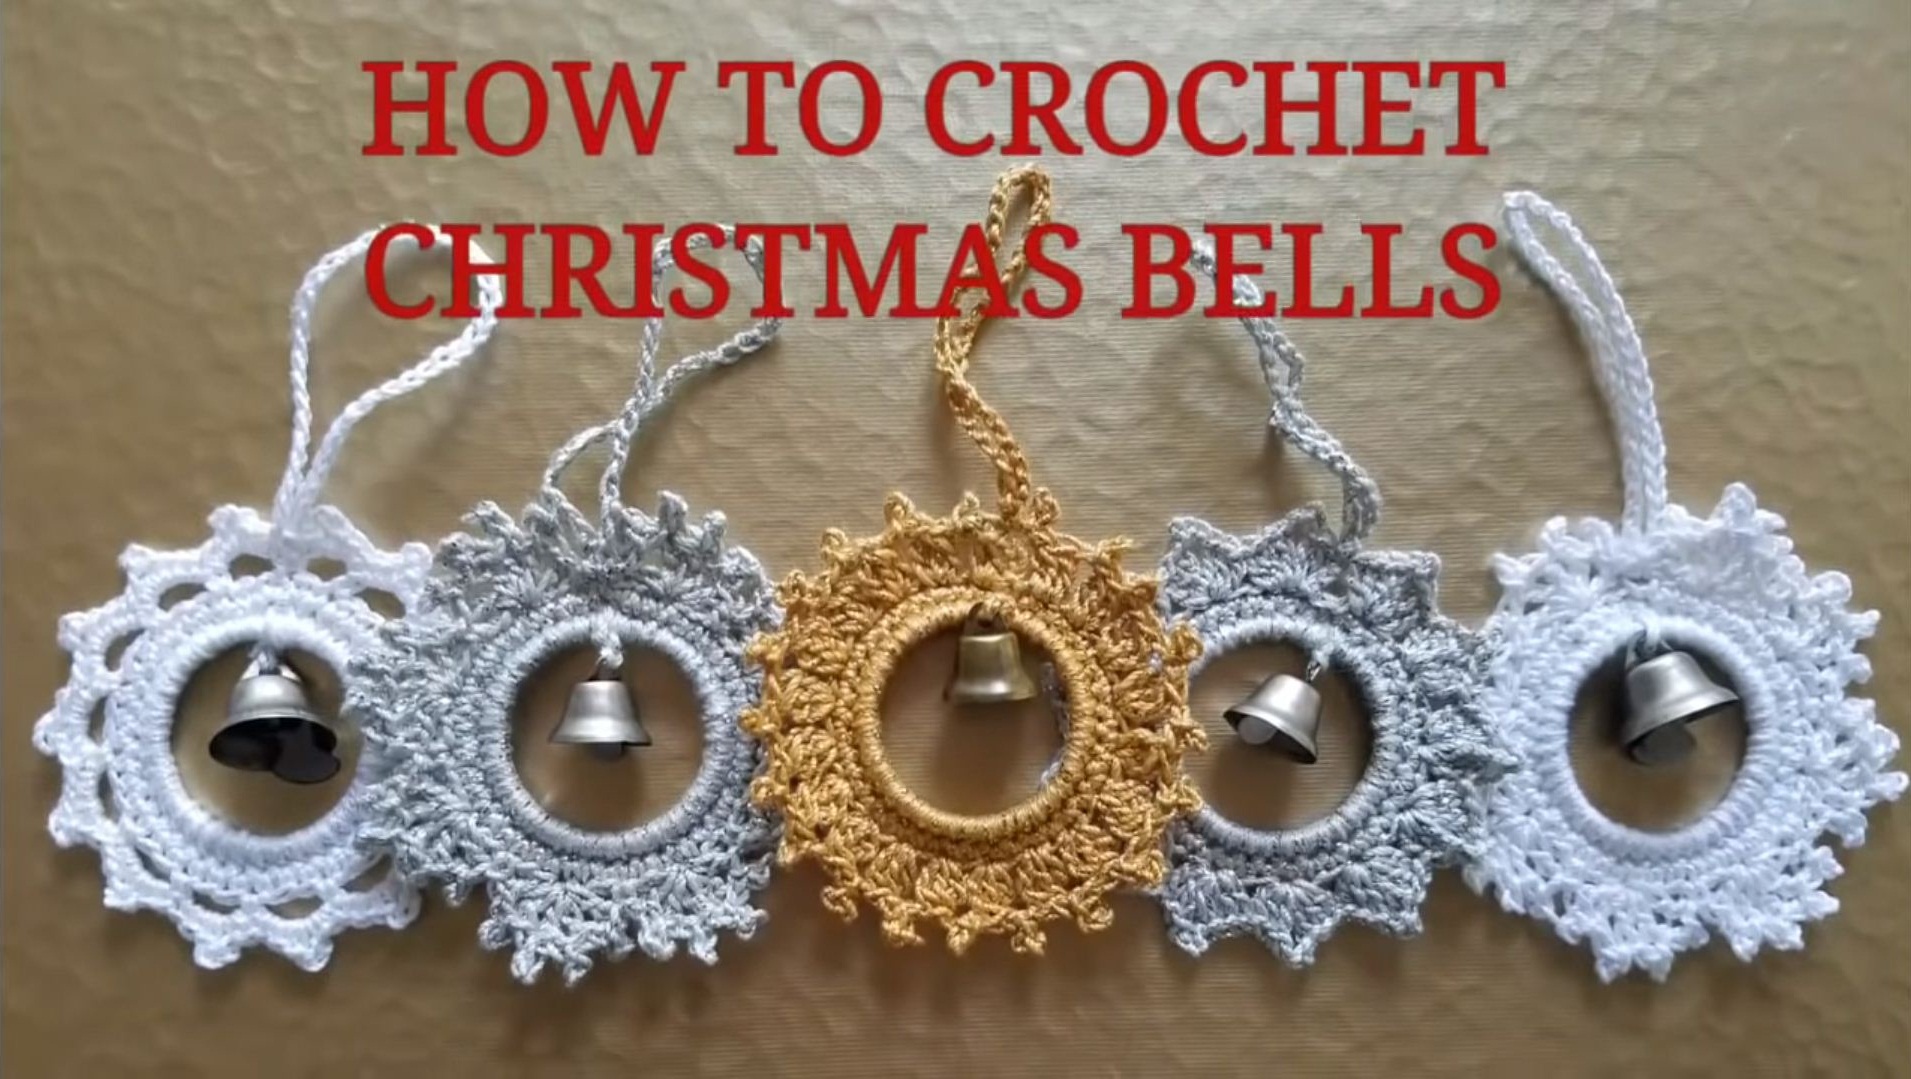 Crochet Christmas Ornament With Bell